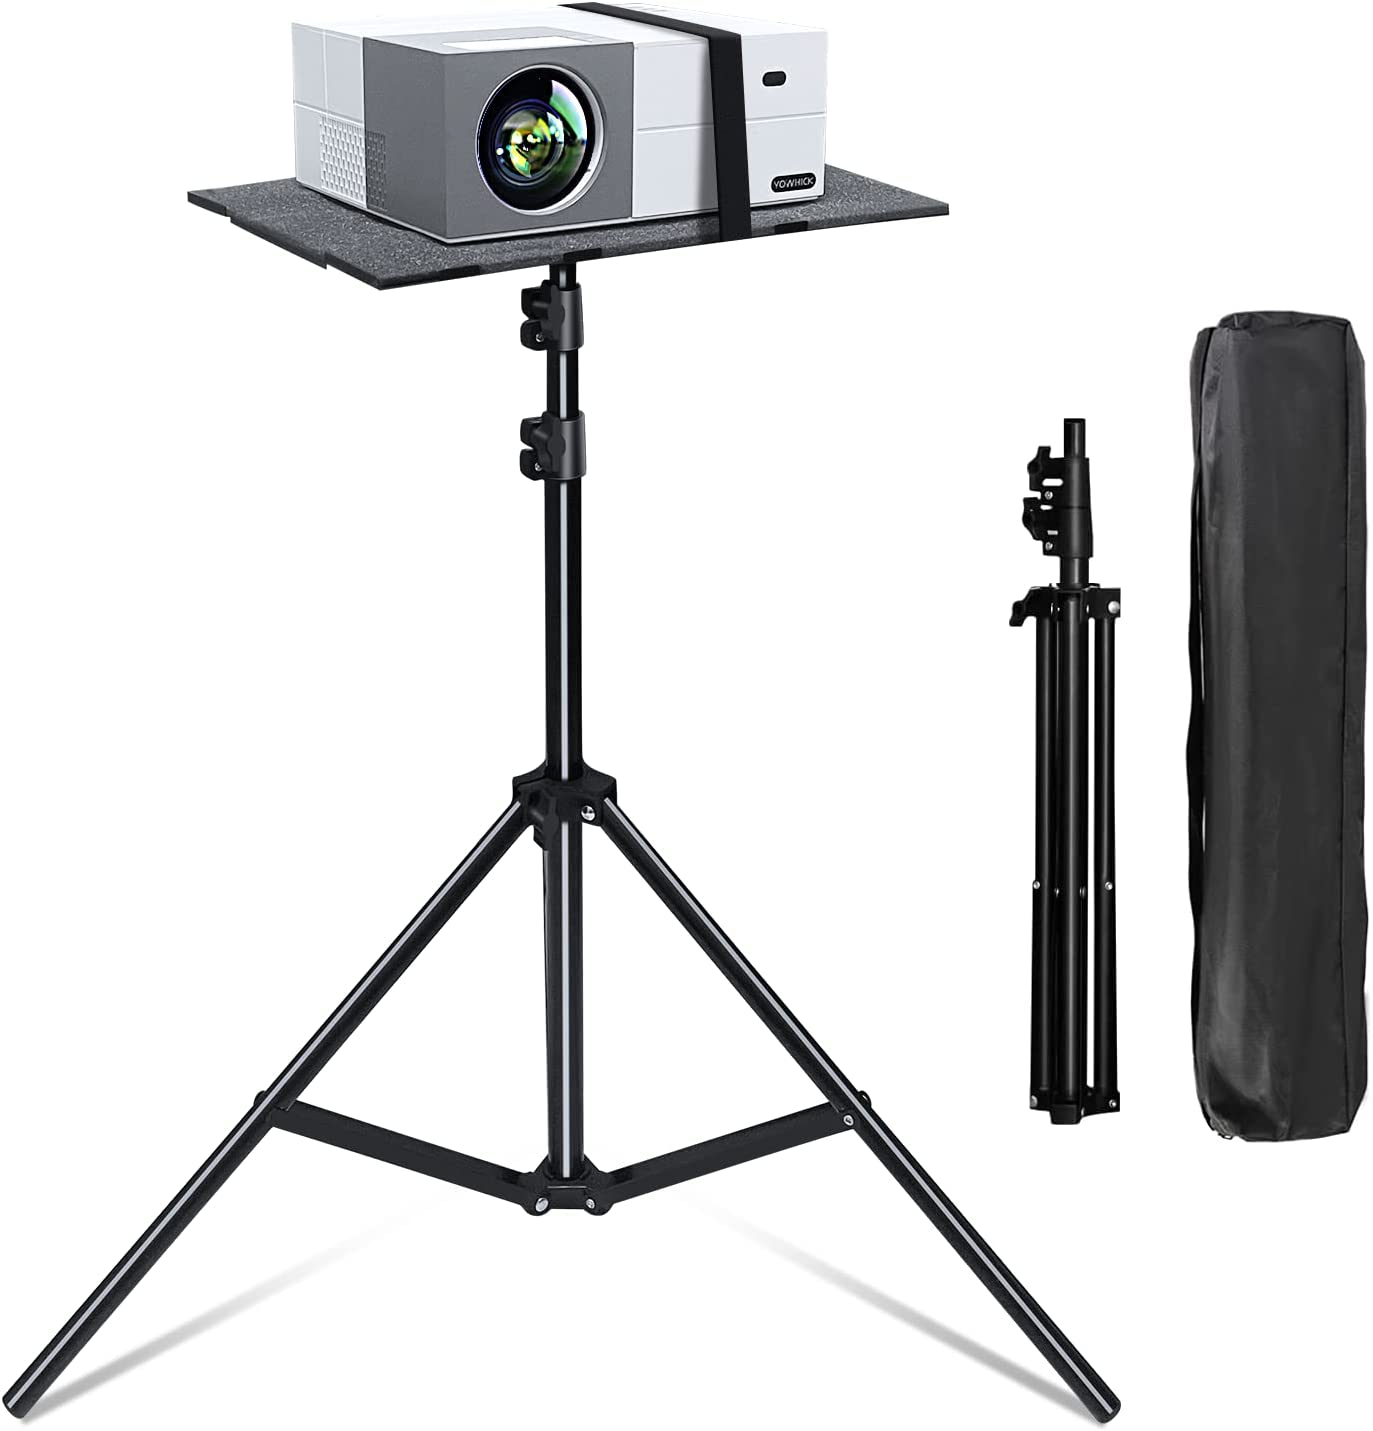 YOWHICK DP03 Projector, 120" Projector Screen with Stand and Projector Tripod Stand Bundle - YOWHICK